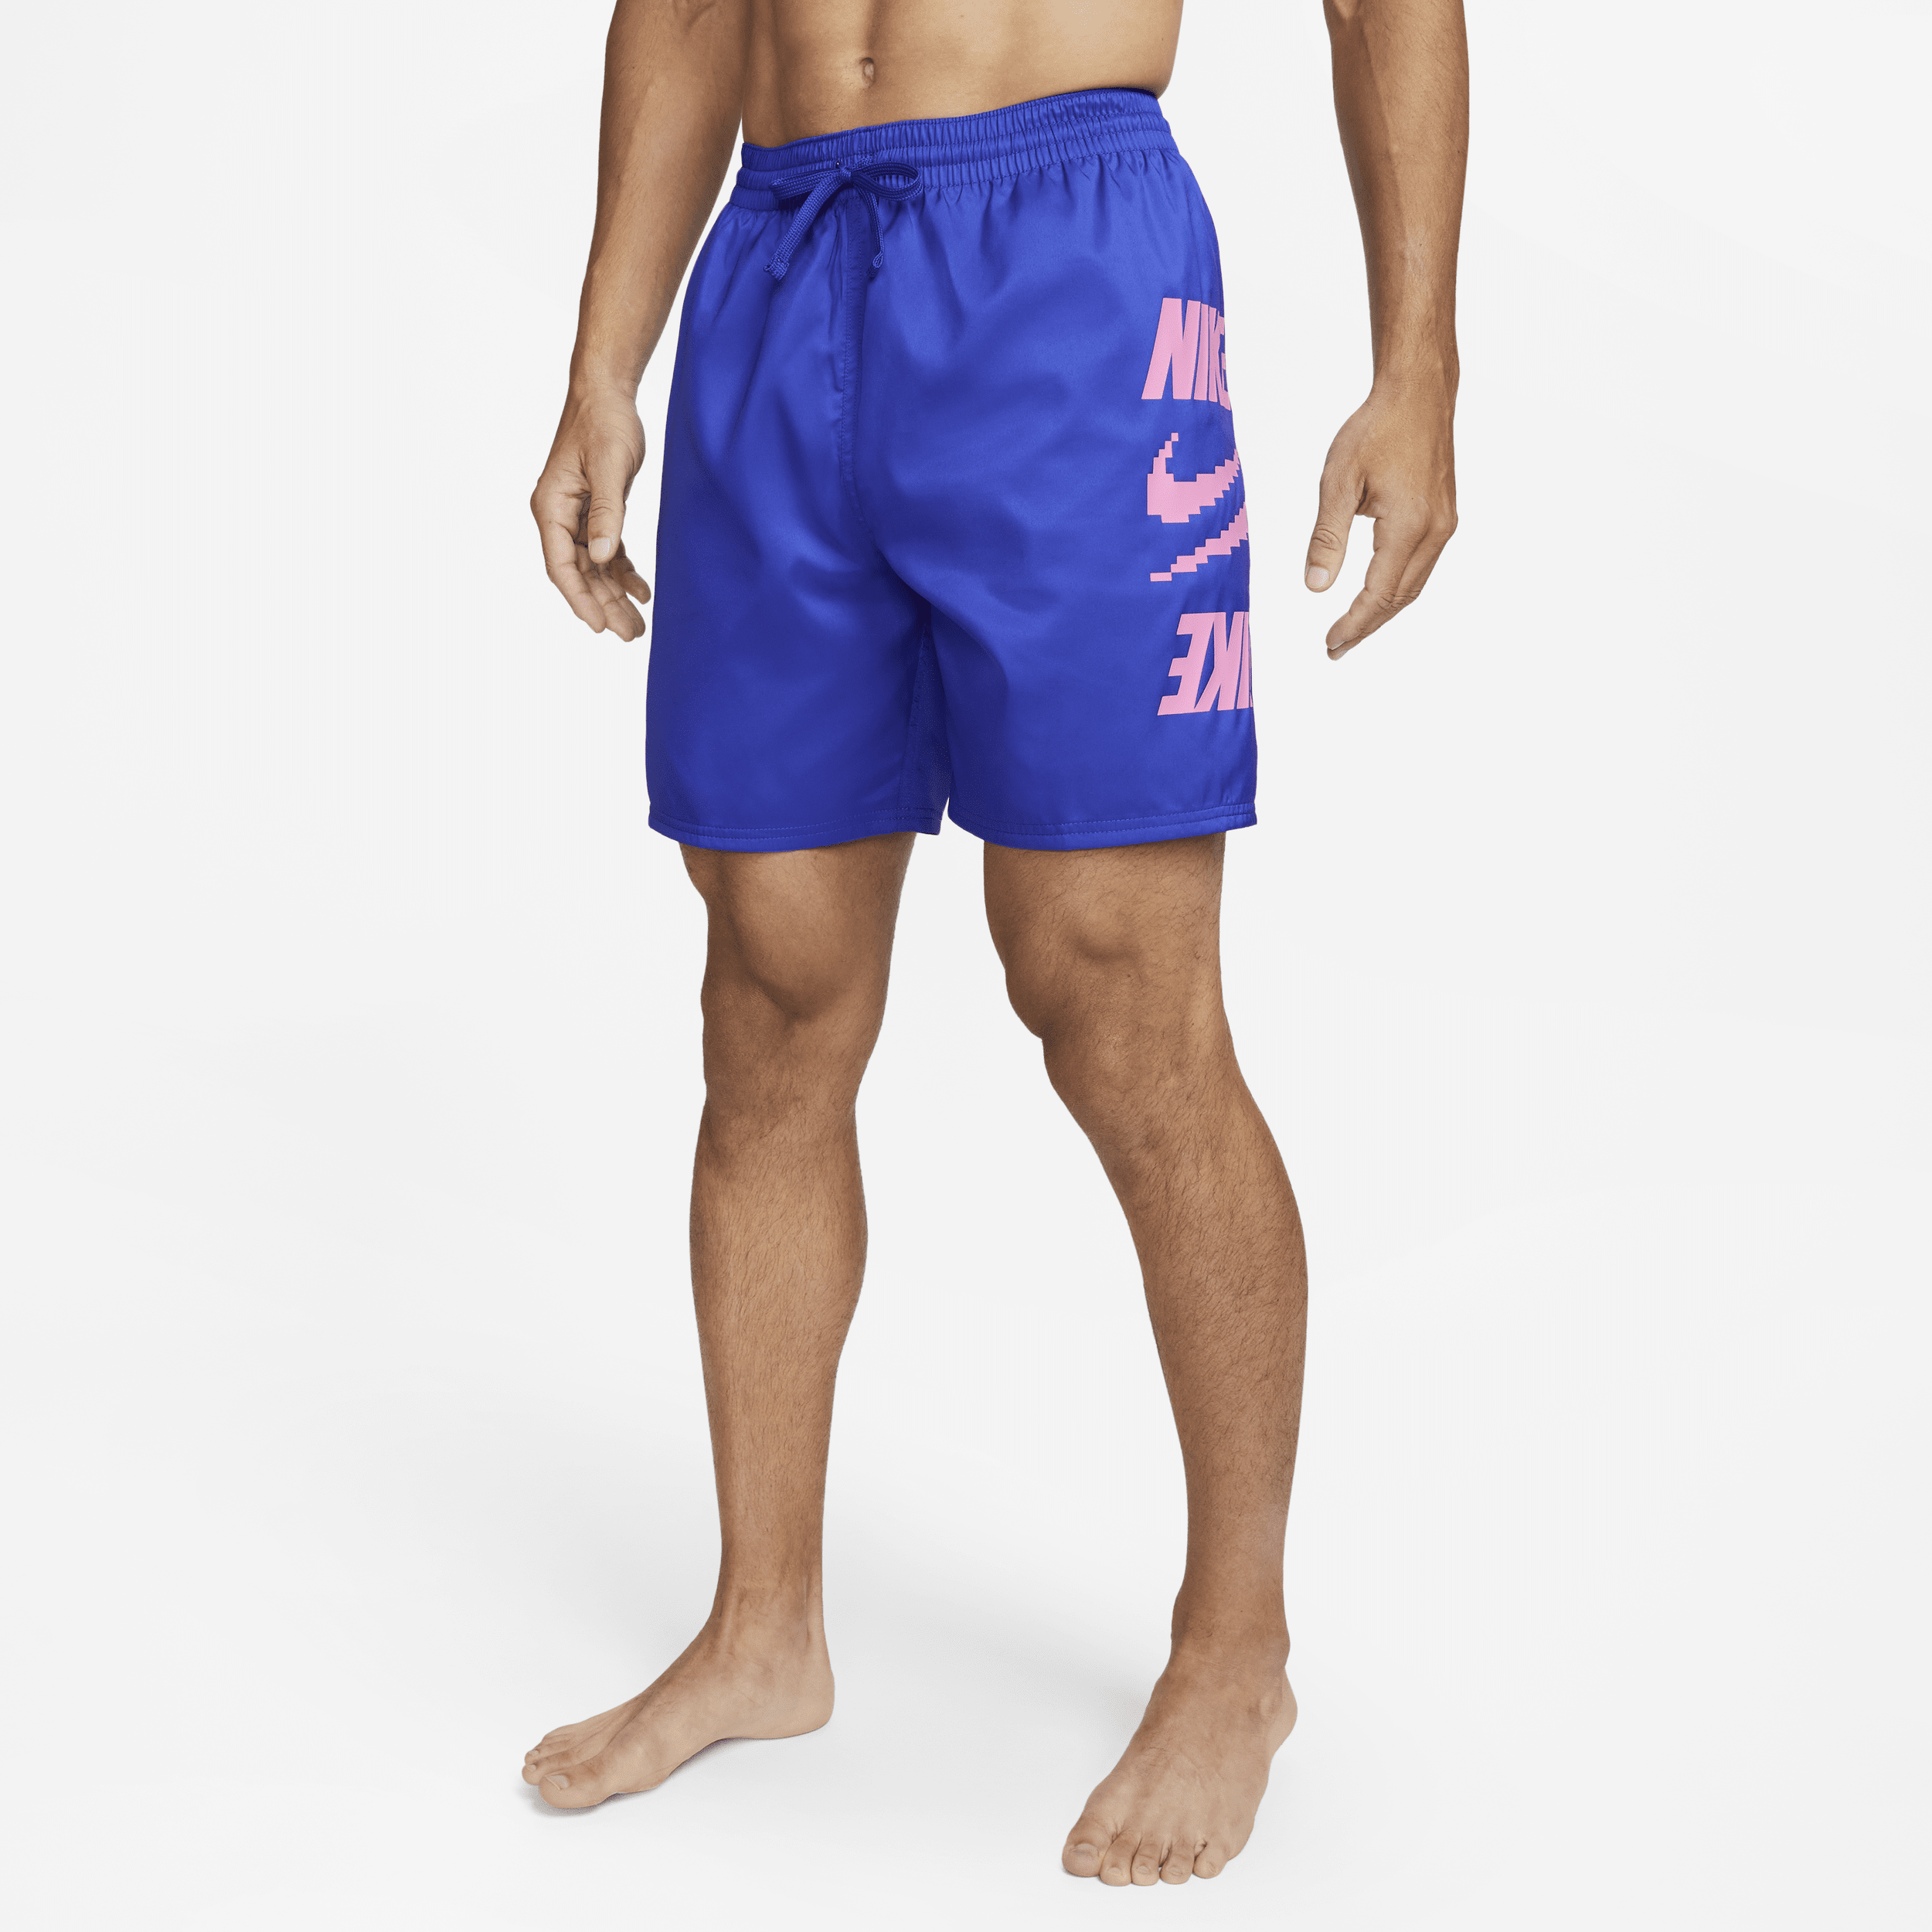 Nike Men's 7" Volley Shorts In Blue